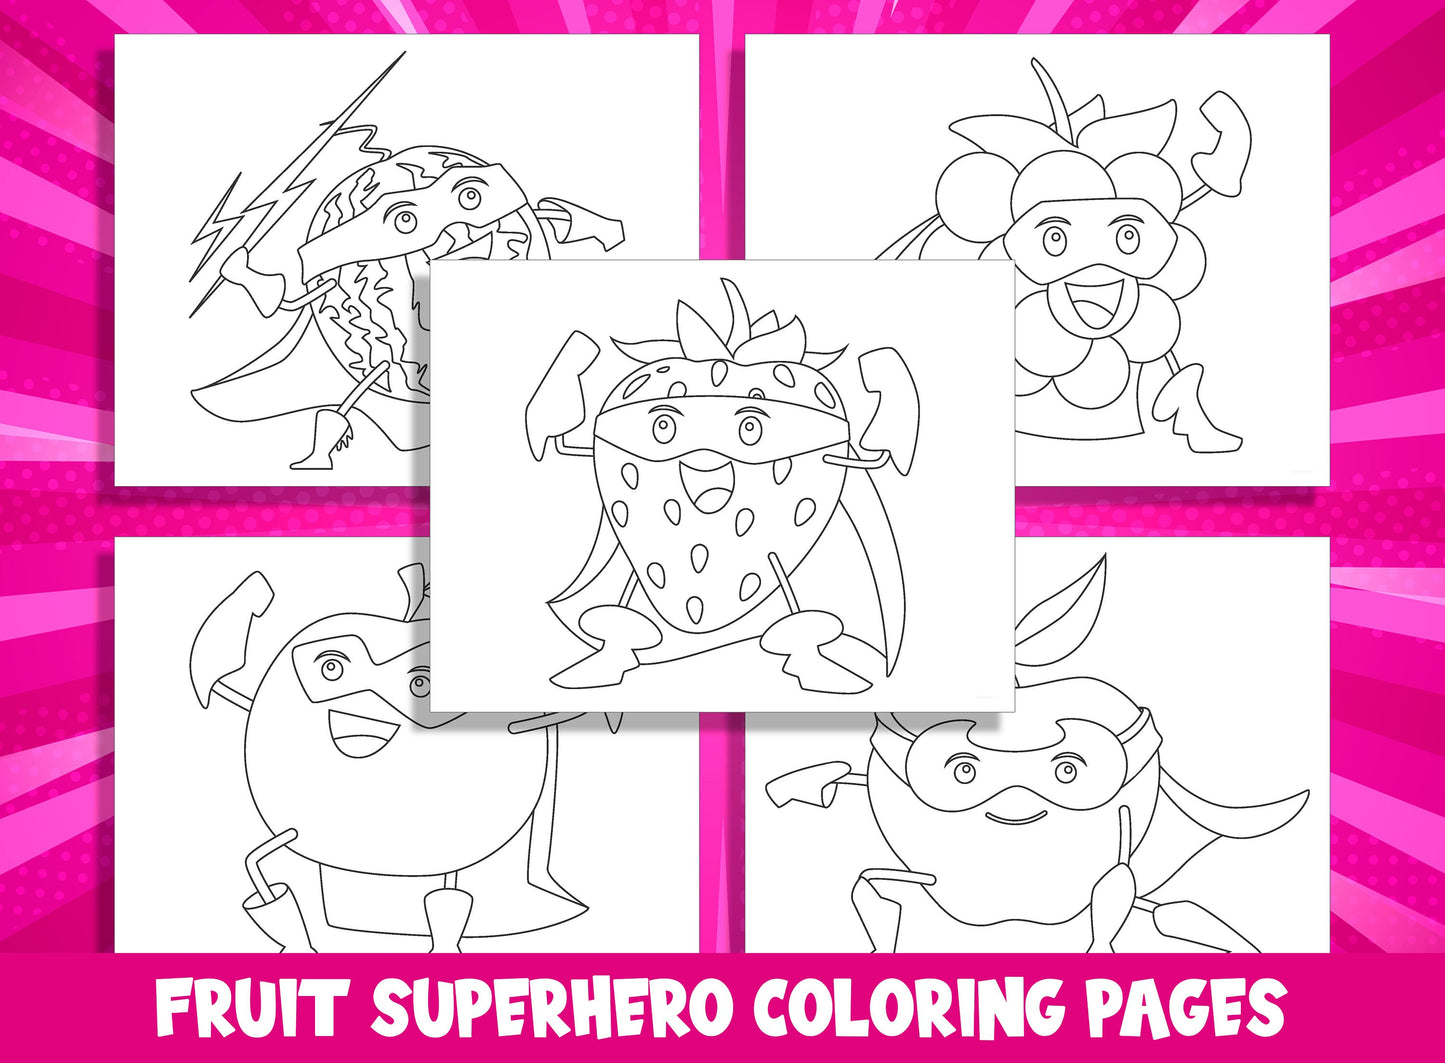 Fruit Superhero Coloring Pages: 20 Fruity Heroes to Color, PDF File, Instant Download